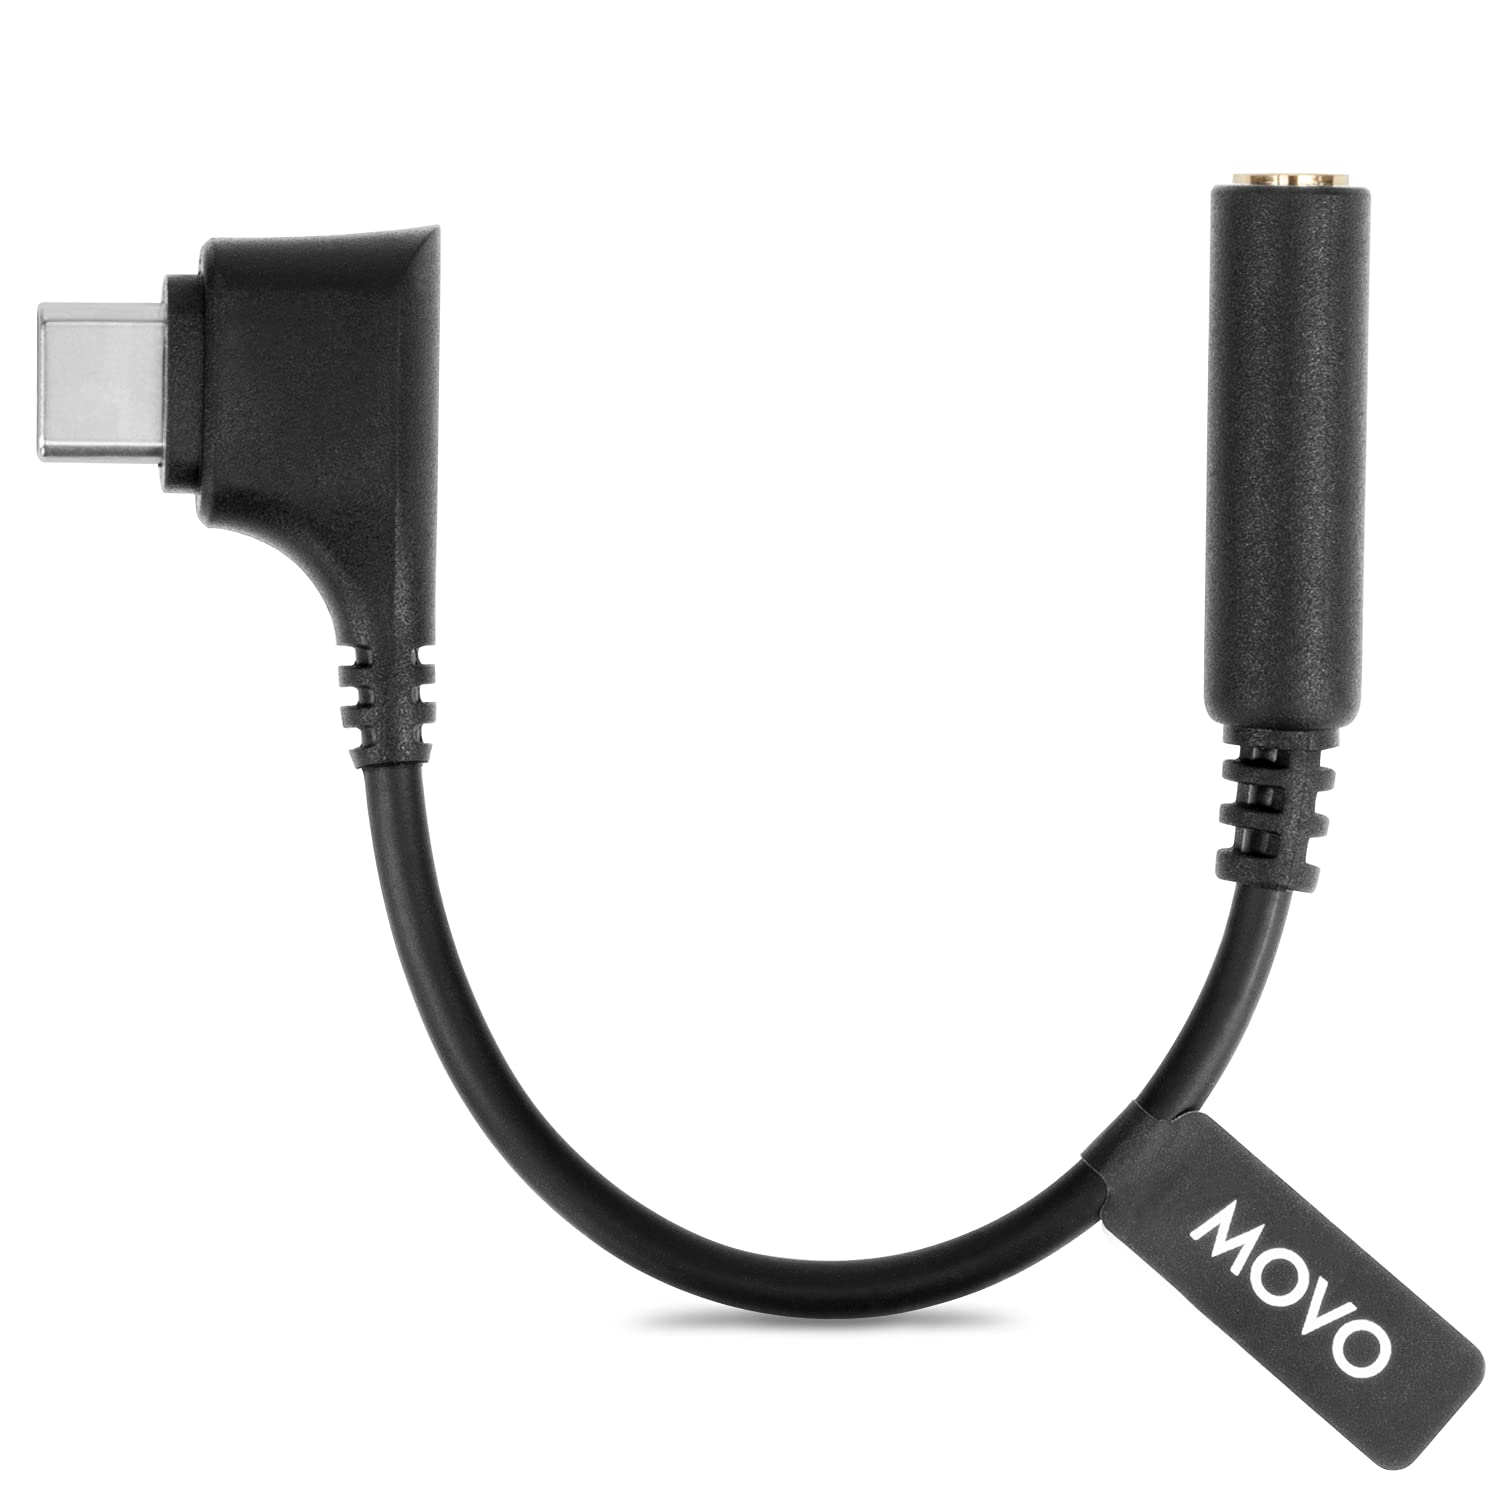 Movo UCMA-3 USB C to 3.5mm Audio Adapter for Microphones - 4-Pole Aux to USB Type C Pixel and Galaxy Smartphones - Female 3.5mm to USB-C Male Right Angle Head - Type-C USB to 3.5mm Jack Audio Adapter  - Like New